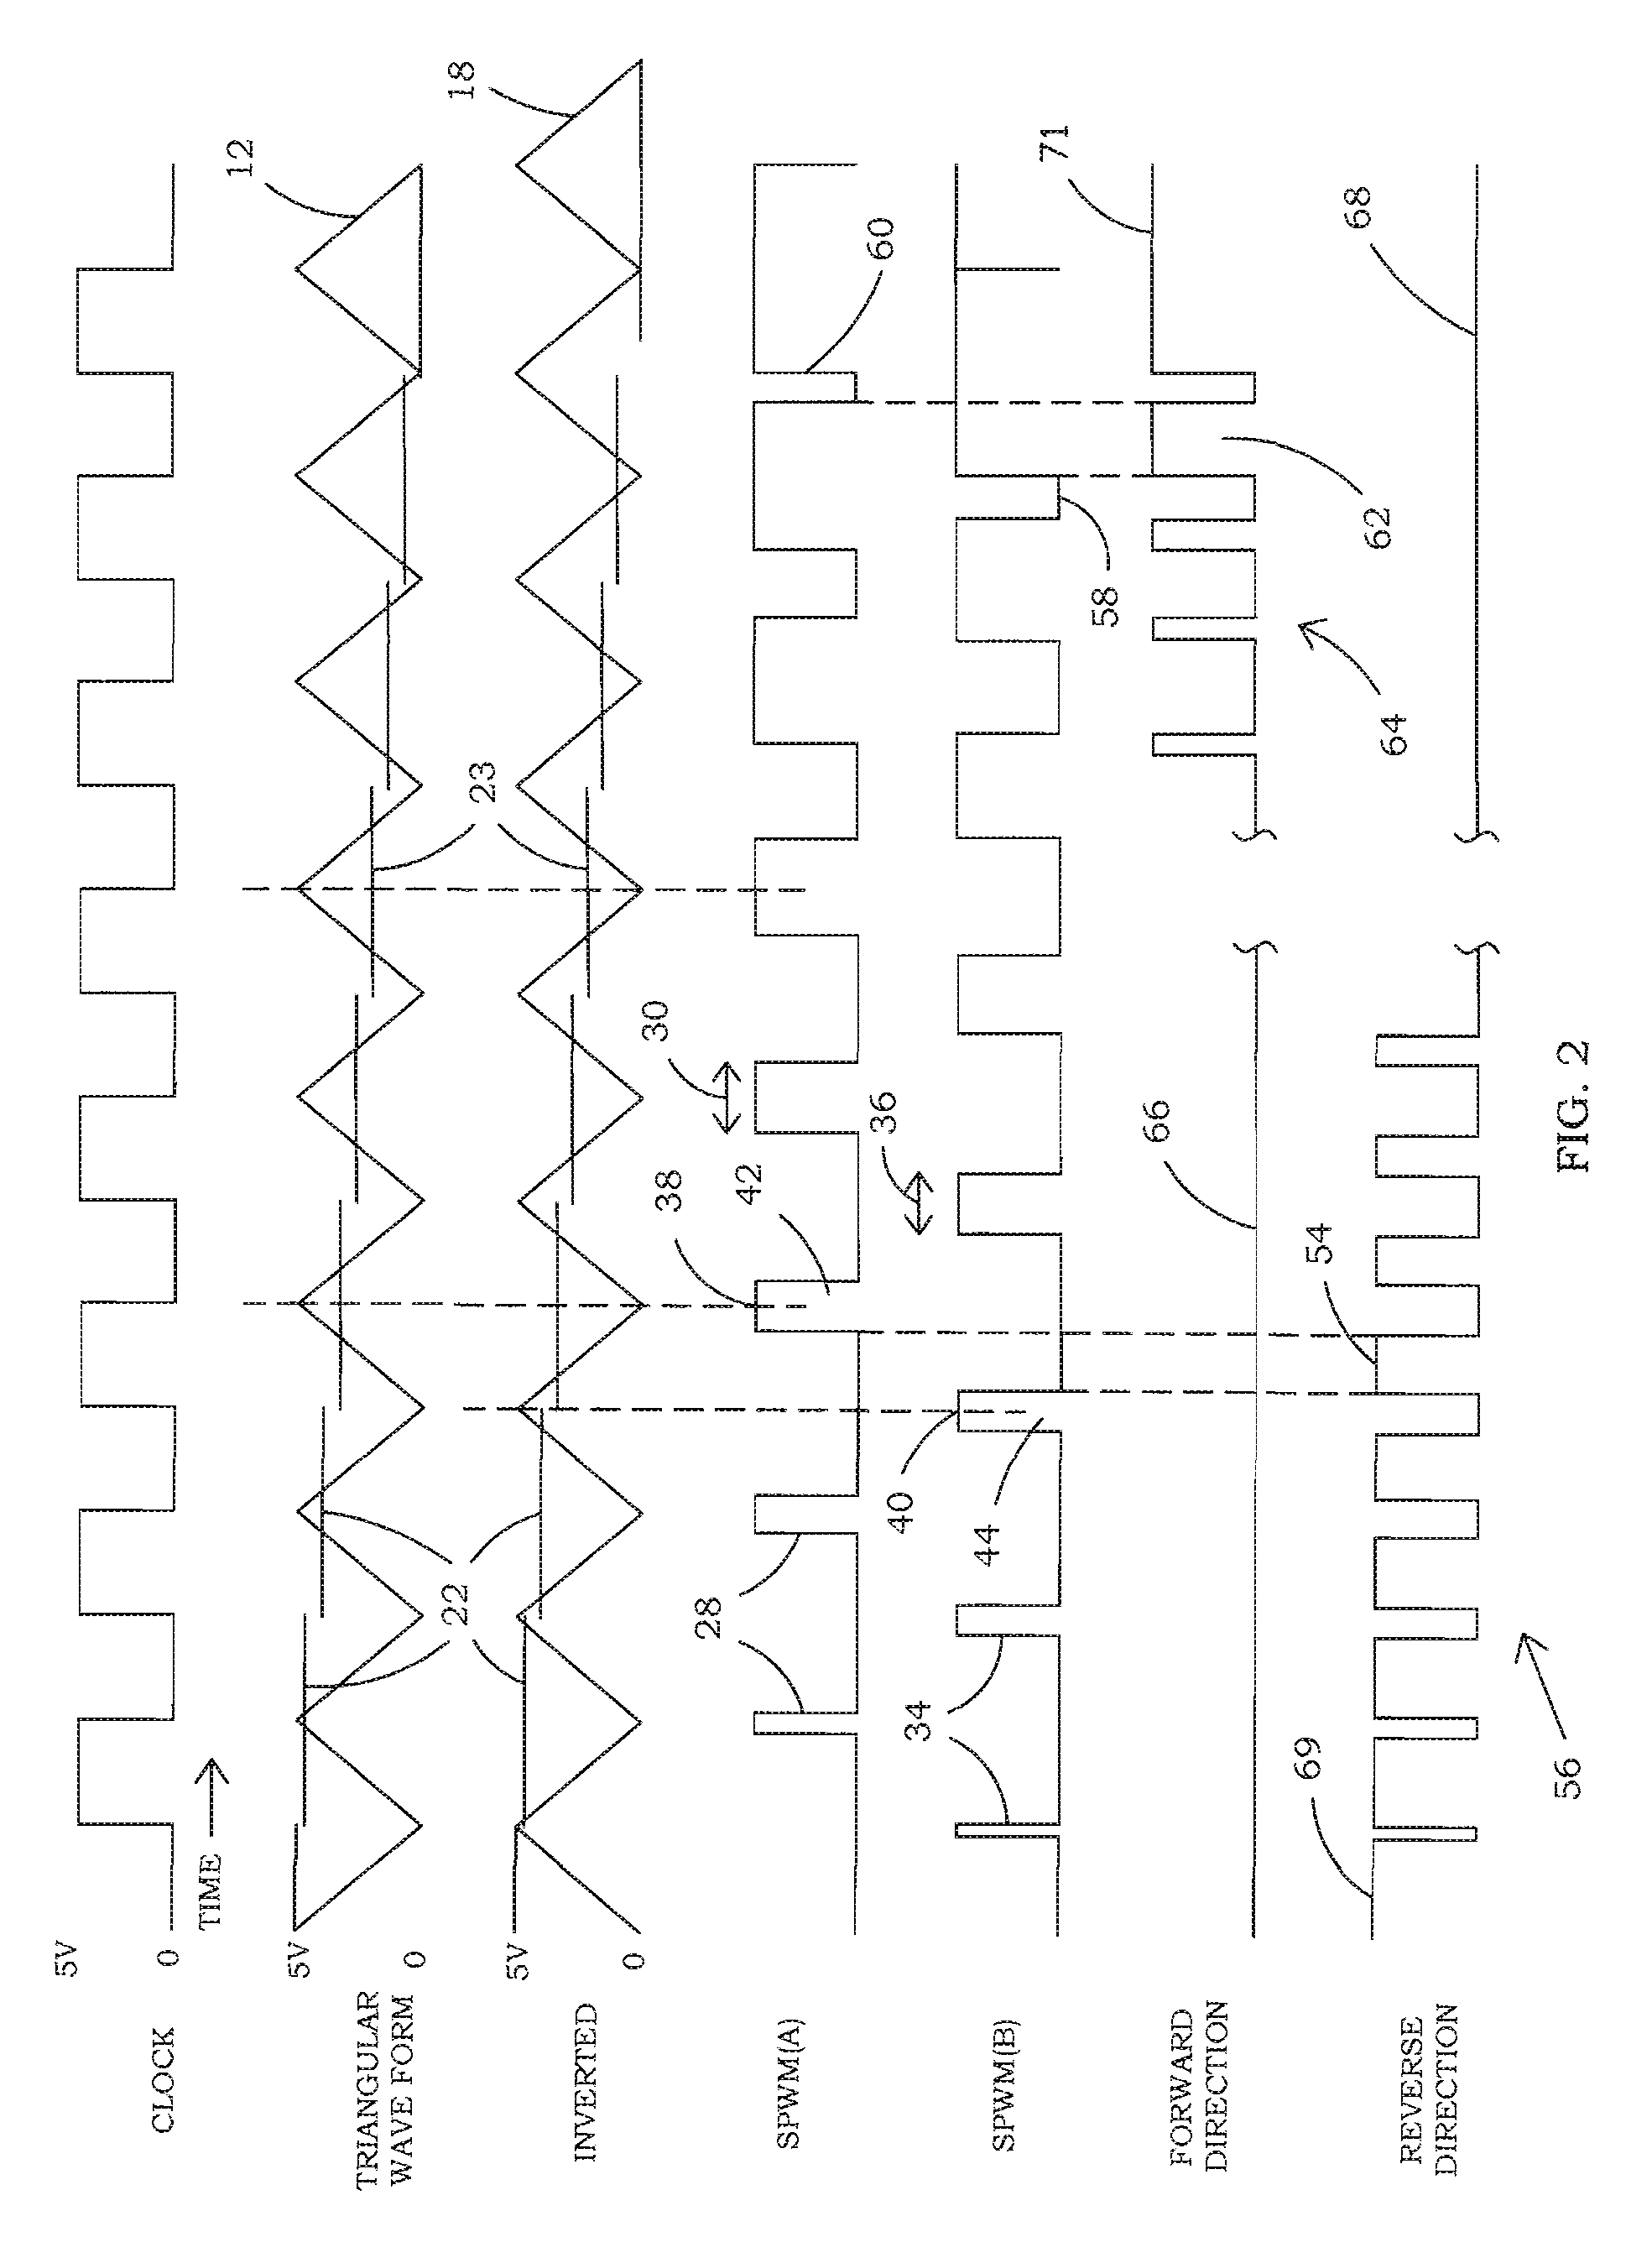 Digital pulse width modulated motor control system and method